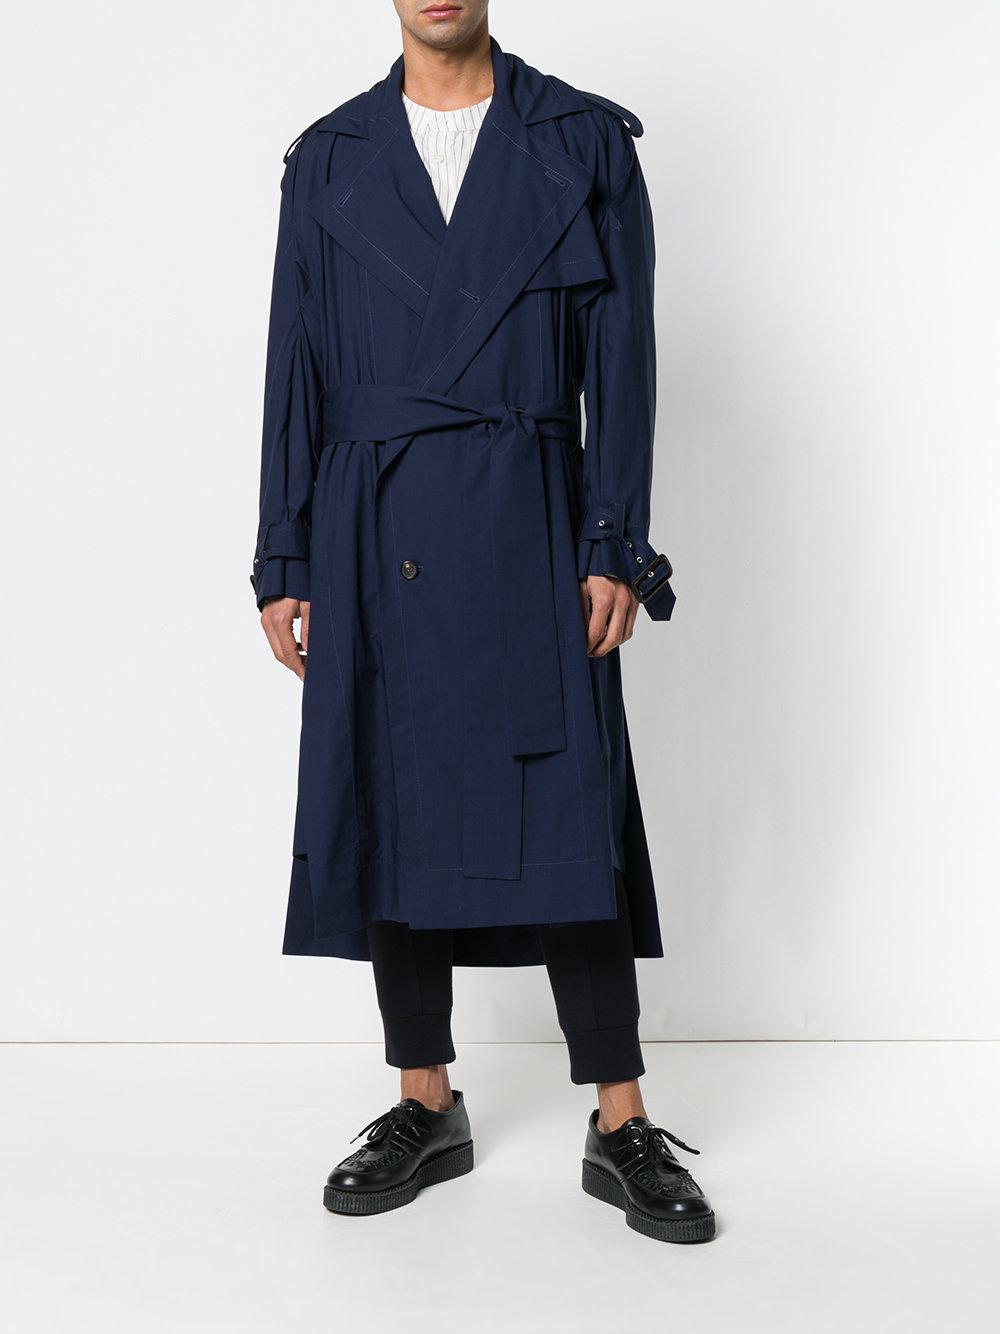 Vivienne Westwood Cotton Oversized Trench Coat in Blue for Men - Lyst